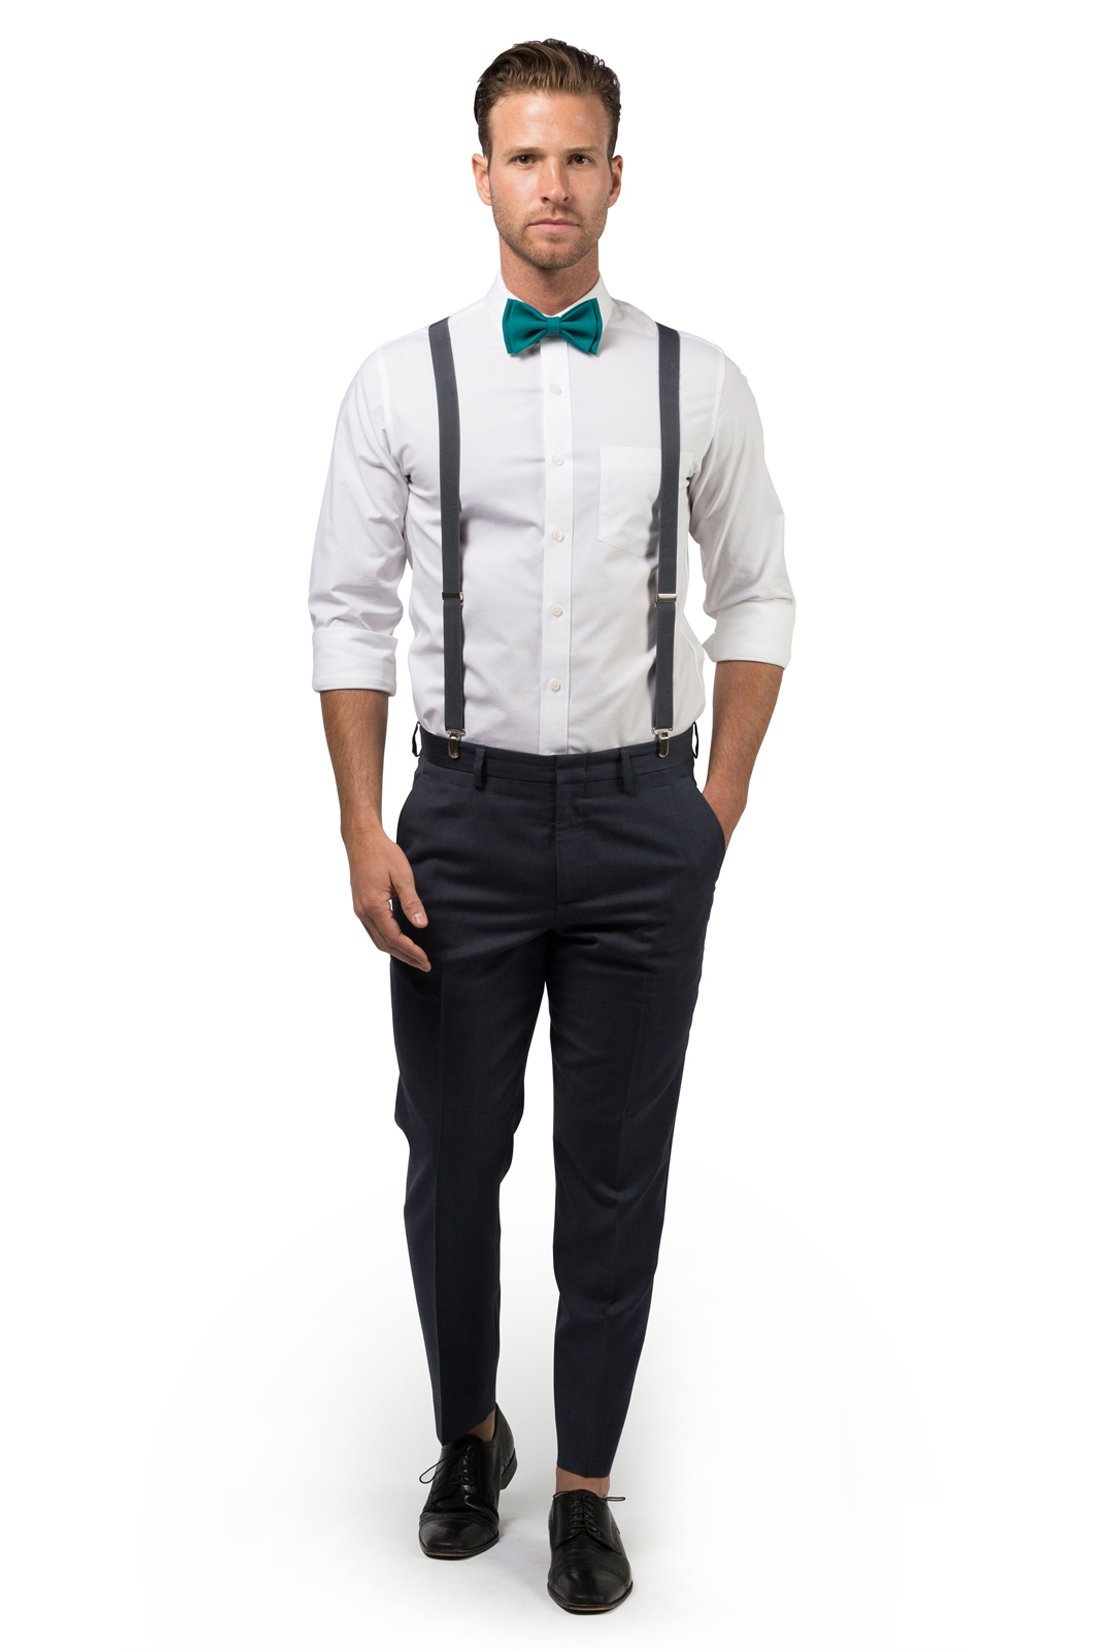 Charcoal Grey Suspenders & Teal Bow Tie - Baby to Adult Sizes– Armoniia